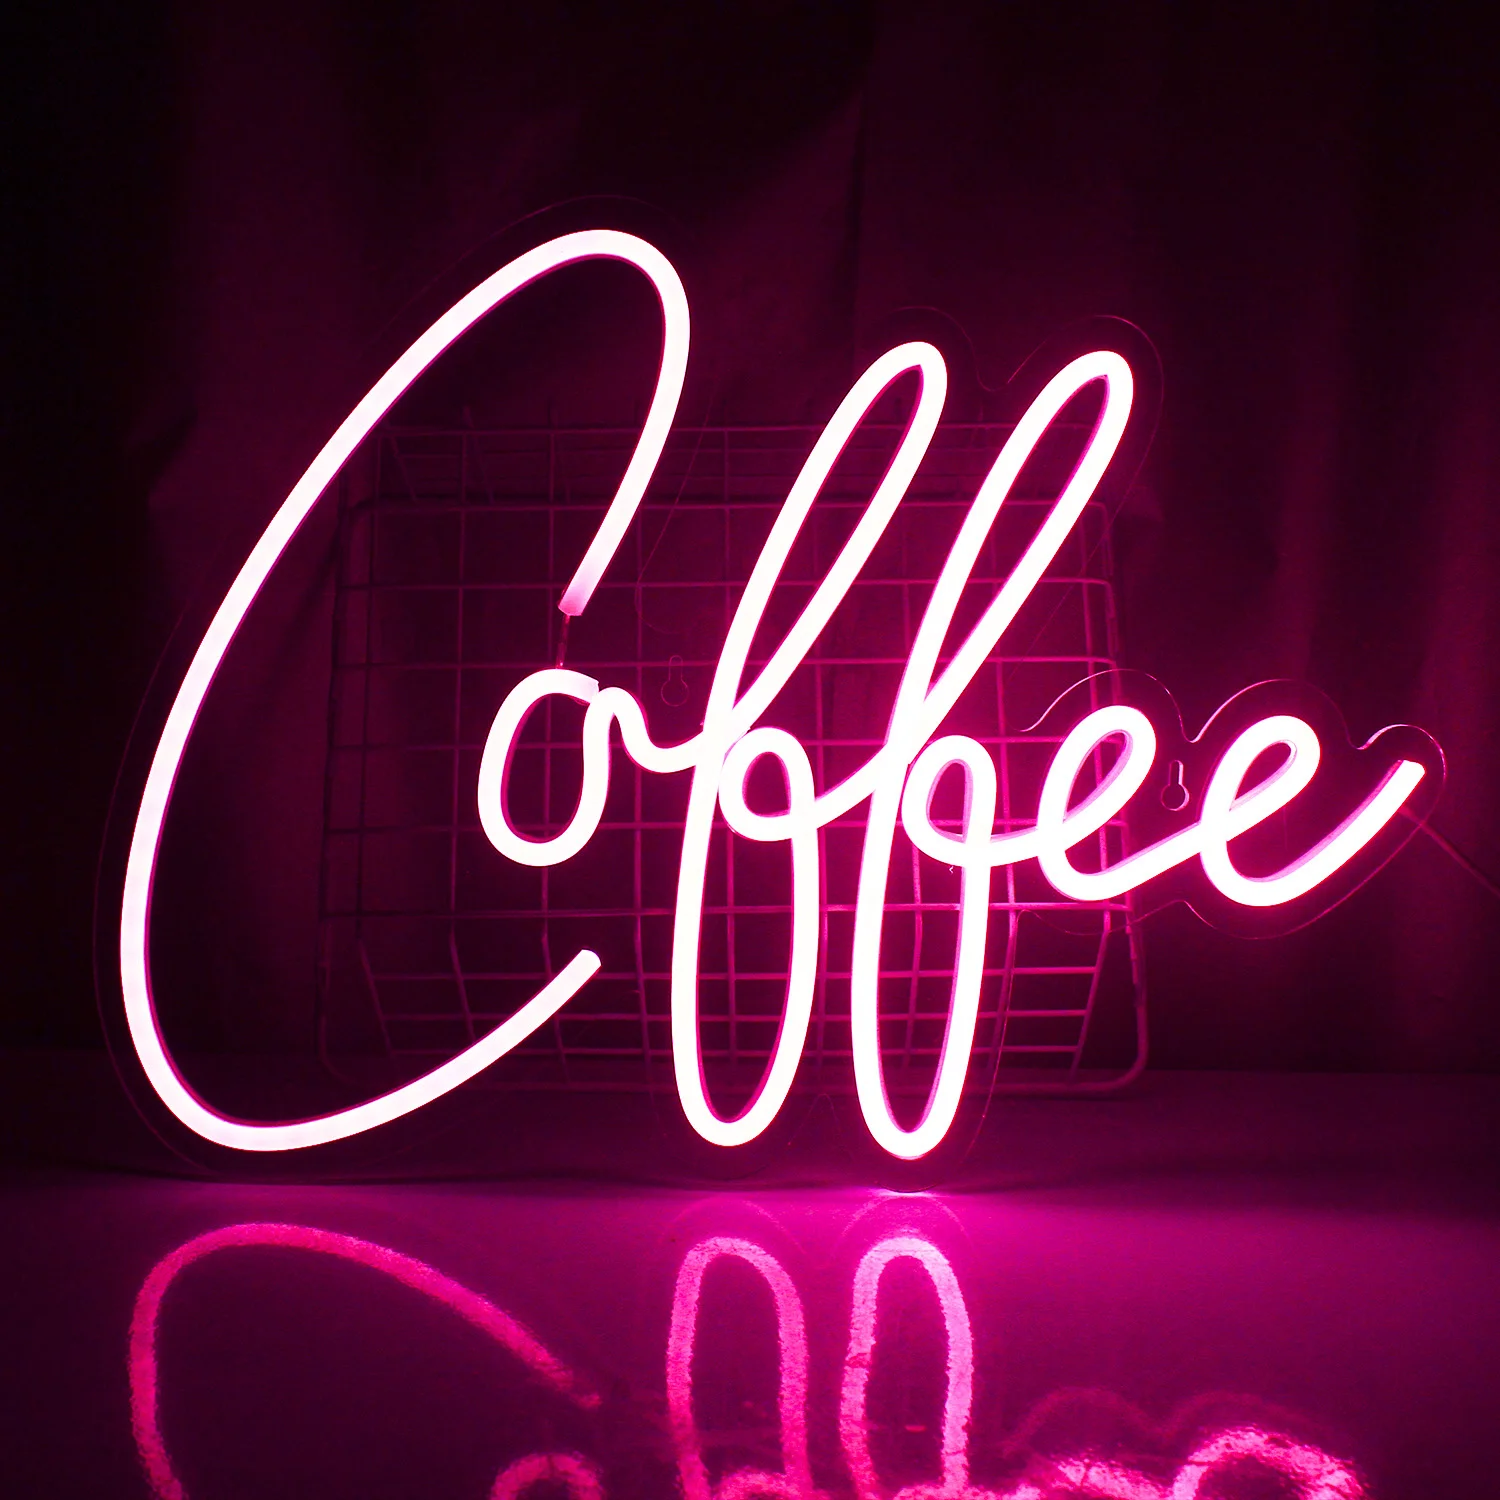 Pink Coffee Shop Neon Sign Led Acrylic Custom Light for Cafe Restaurant Hotel Bar Club Party Beautiful  Decorate Neon Light